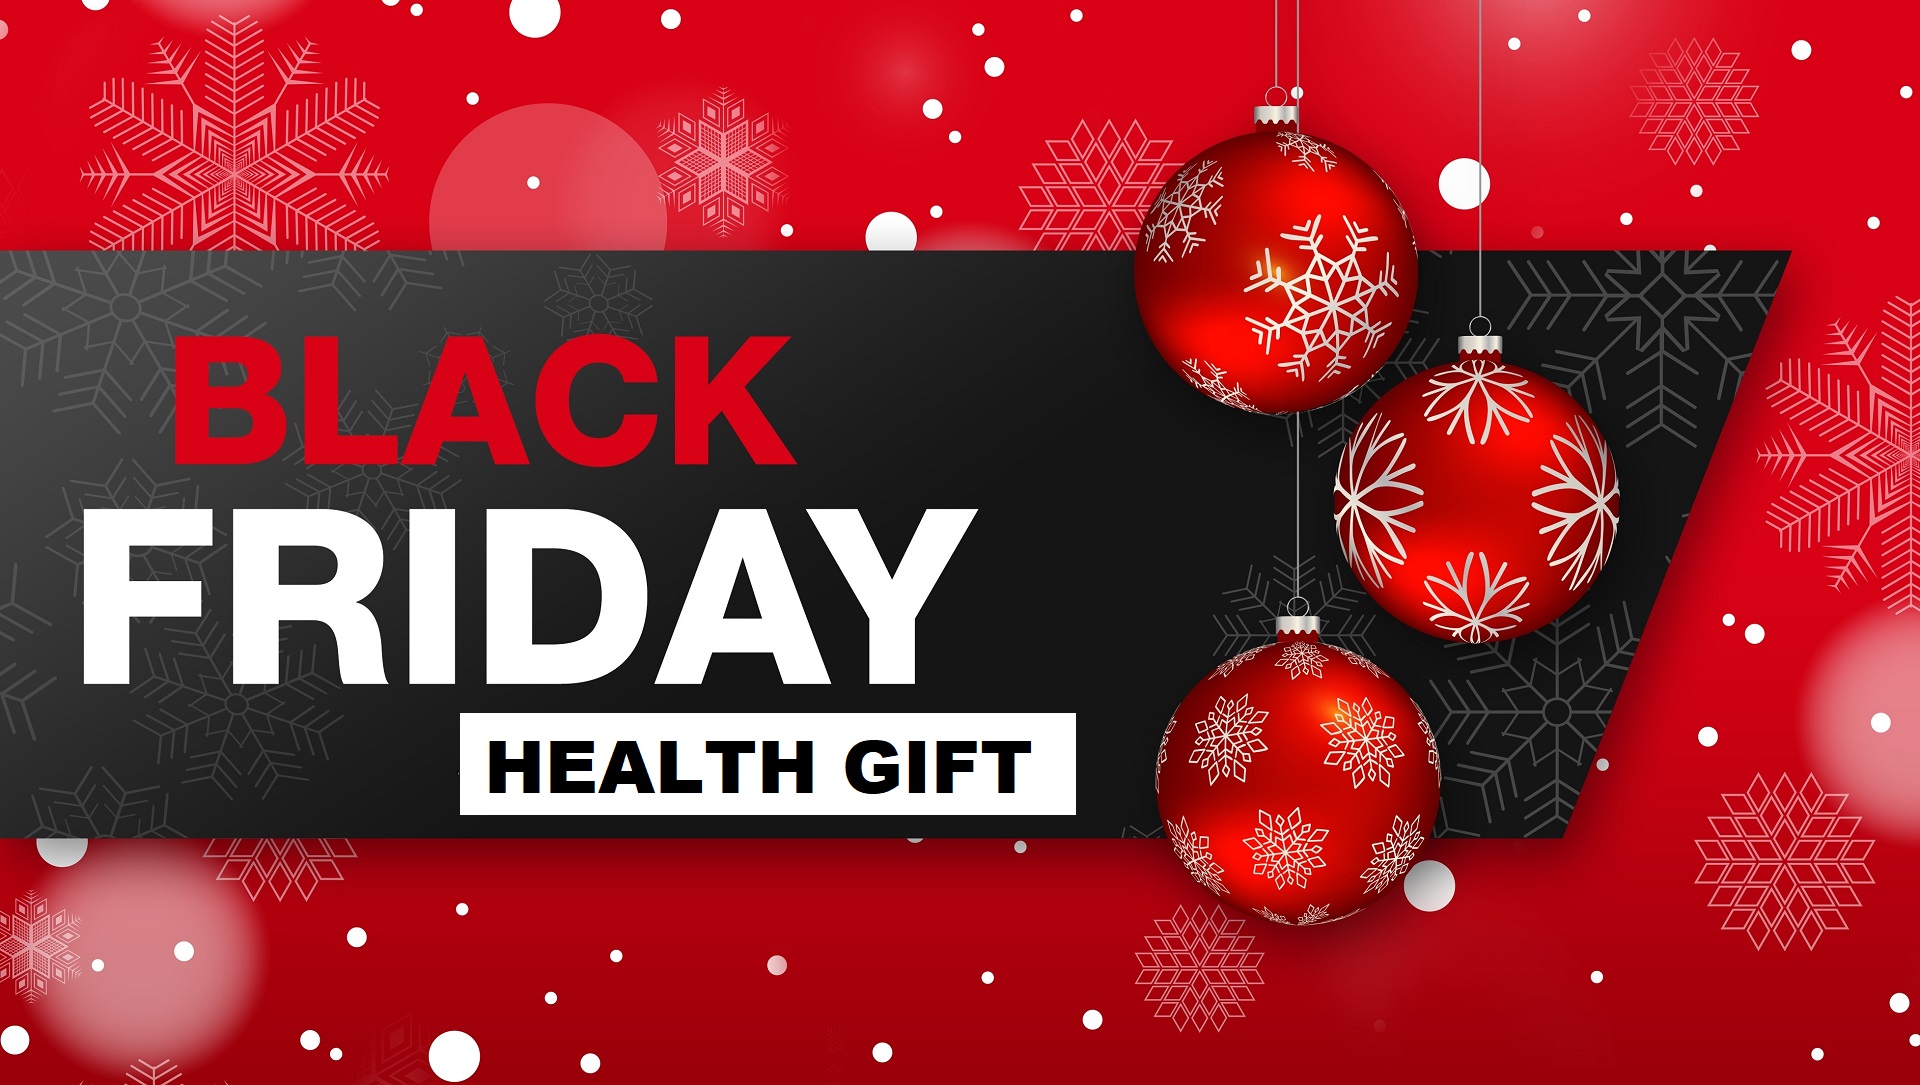 HEALTHY BLACK FRIDAY WITH REGISTERED MASSAGE THERAPY